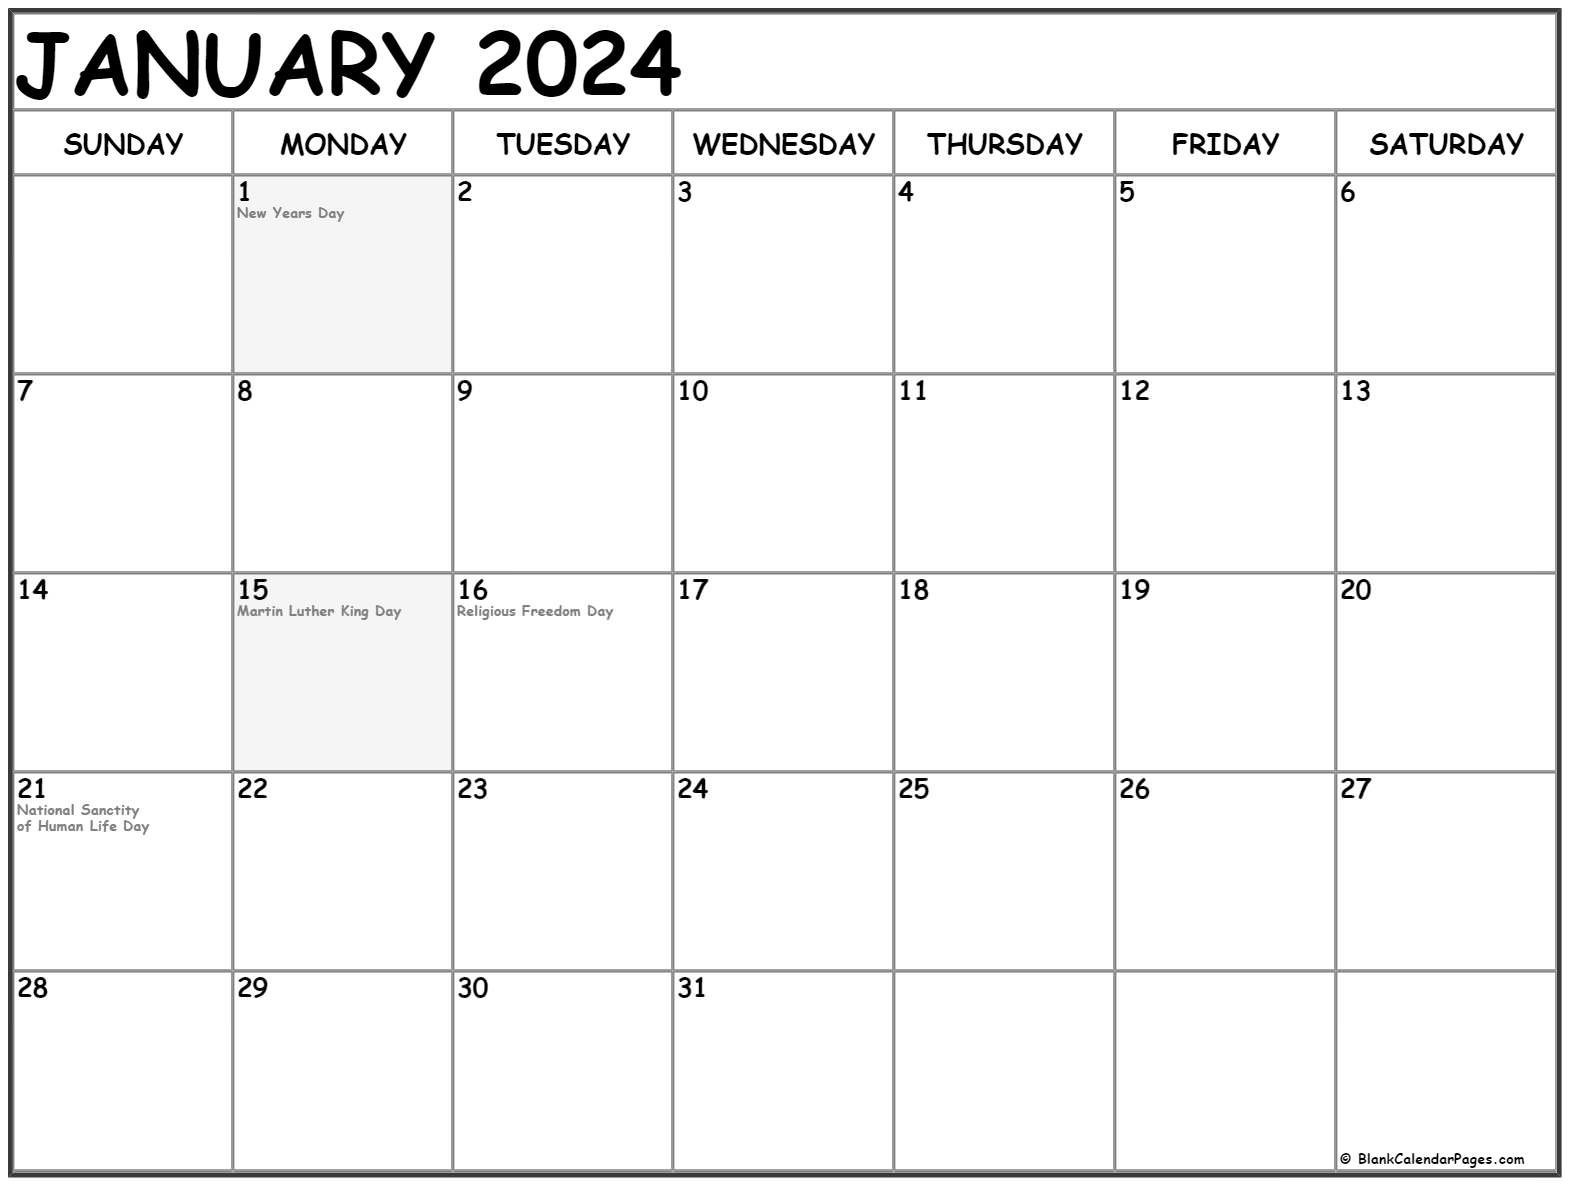 Is There Any Holidays In January 2023